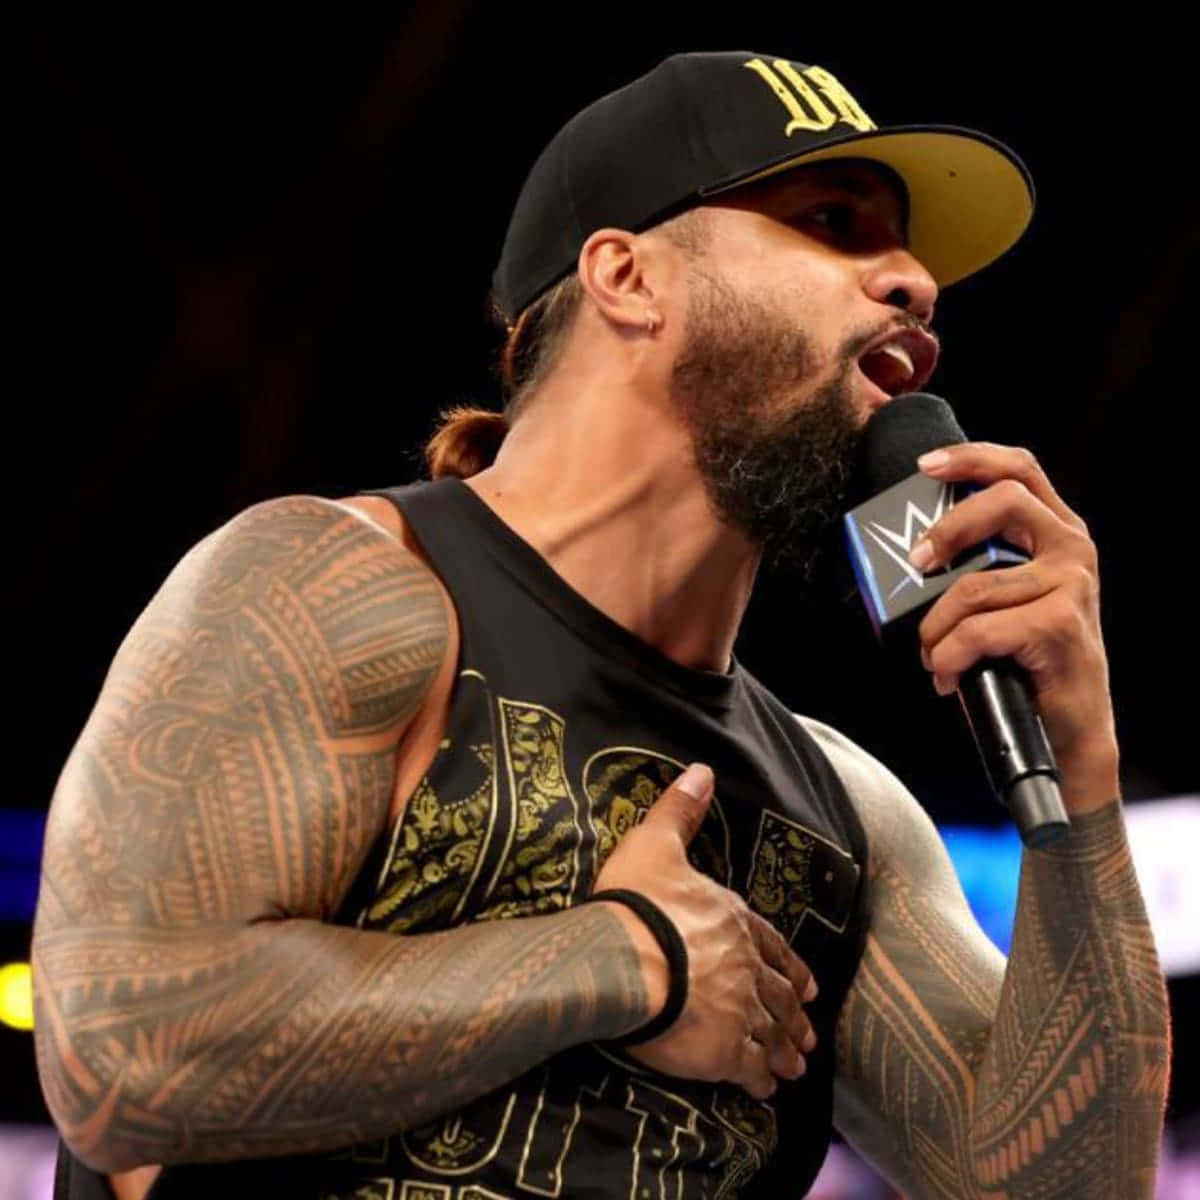 Wwe Superstar Jimmy Uso In Action Wallpaper